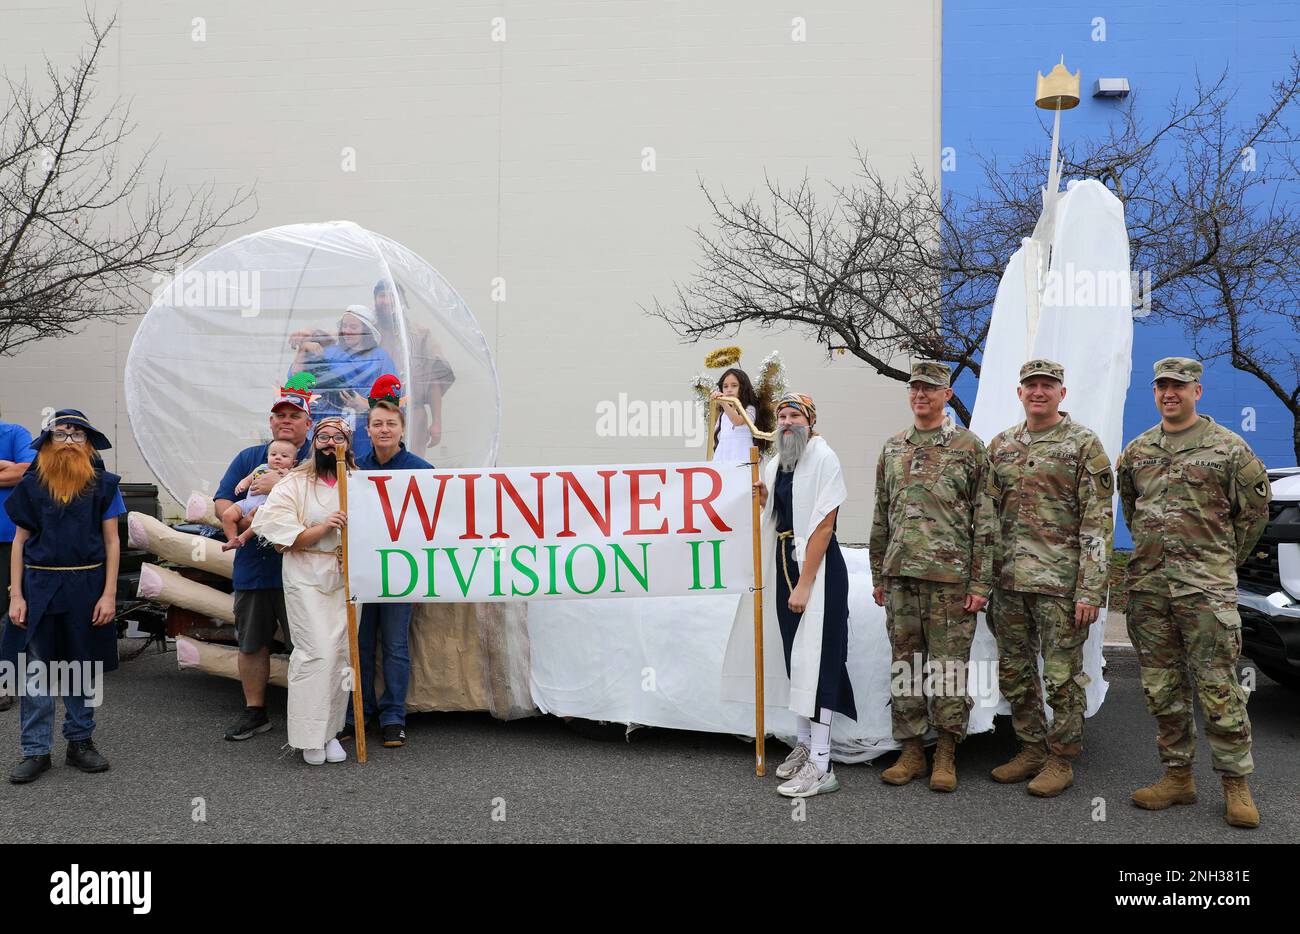 Leaders from the Mobilization Support Brigade and the 120th Infantry Brigade pose with the Division II winners of the float competition for the Gatesville Chamber of Commers' annual Christmas parade held December 10, 2022 in Gatesville, Texas. The U.S. Army leaders were invited to judge floats for the Gatesville Chamber of Commerce annual Christmas parade, as part of a community relations event. Stock Photo